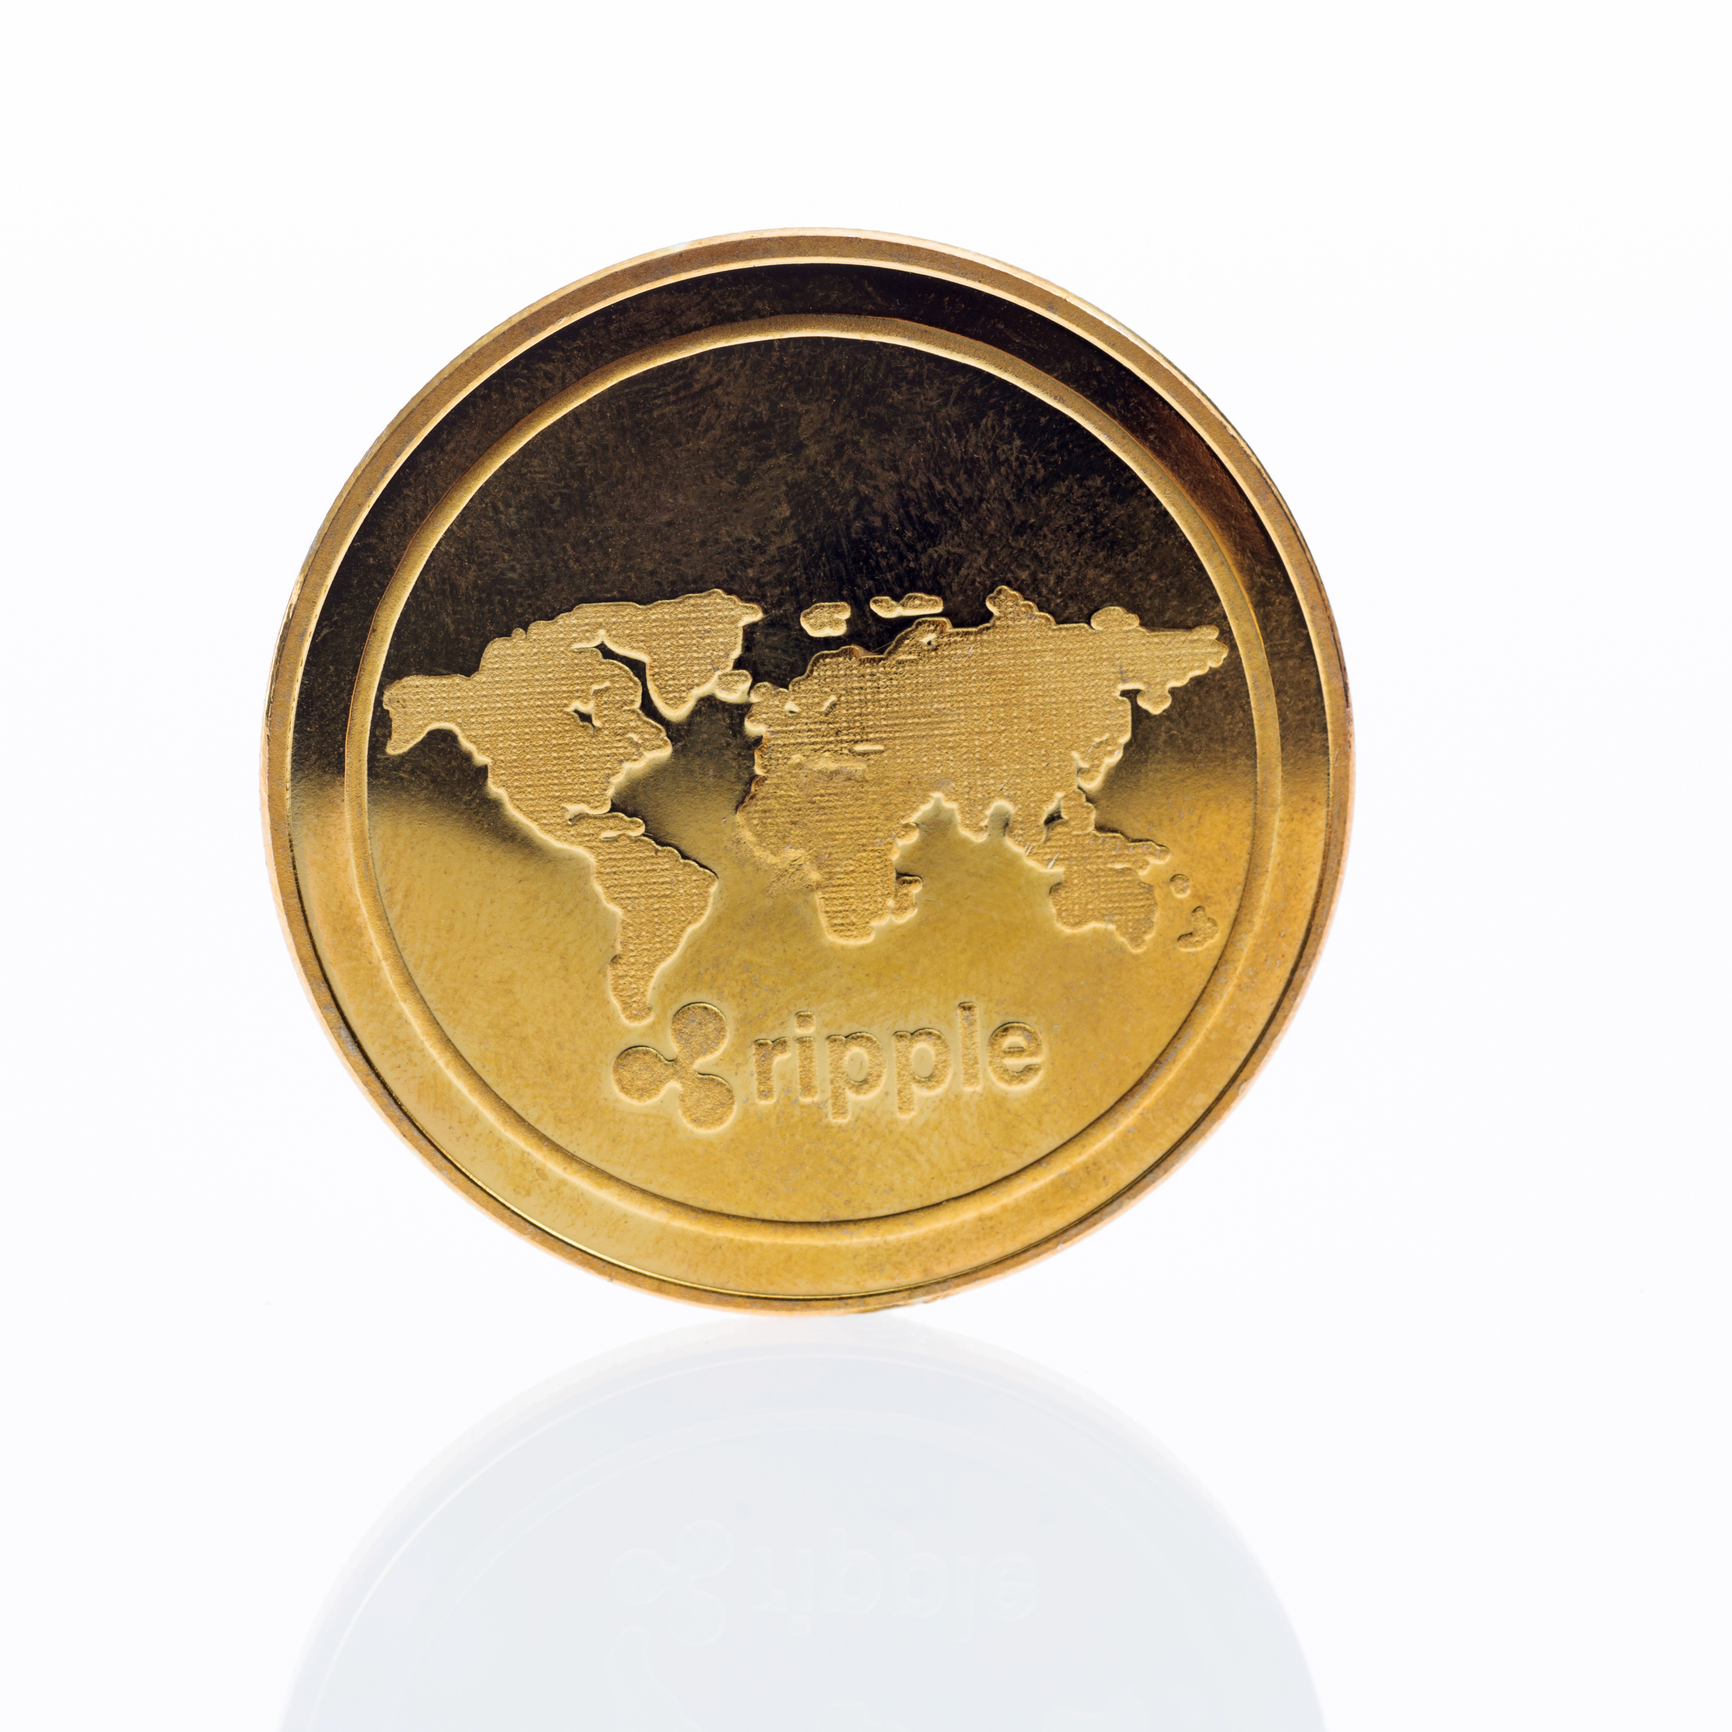 Ripple coin on white background. Ripple is virtual currency.